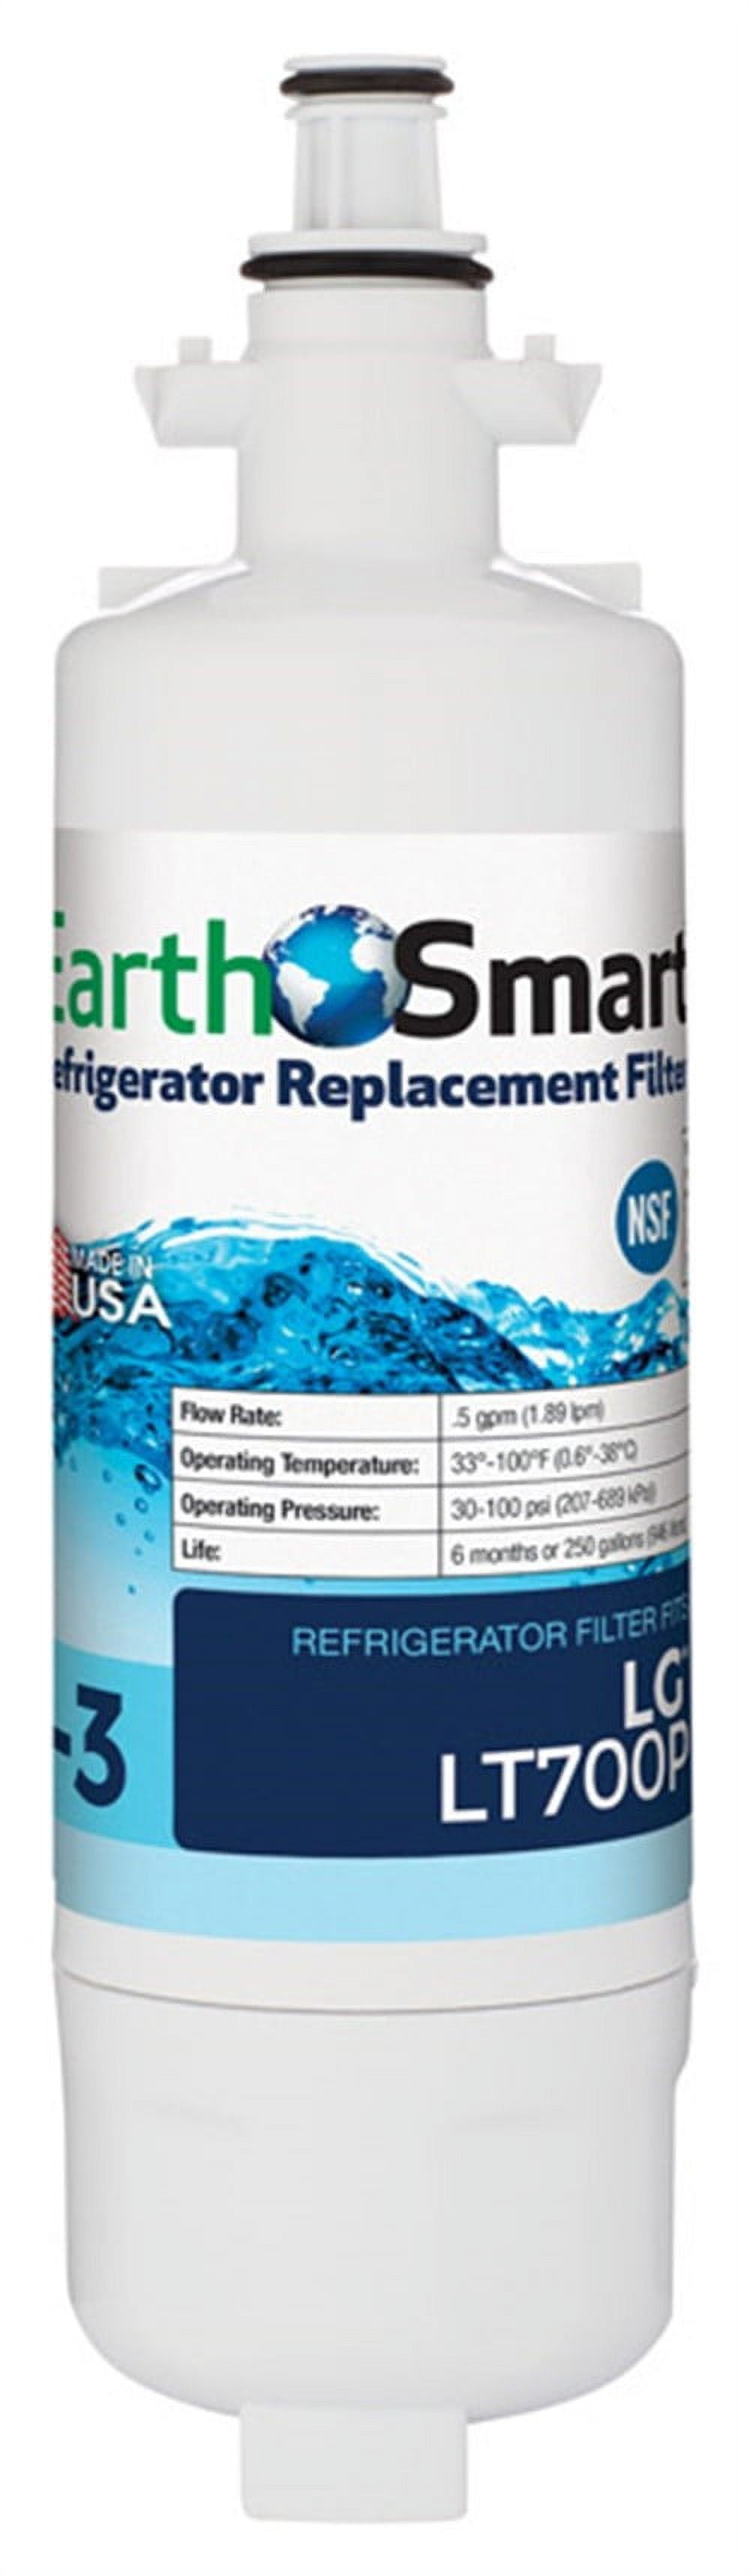 4912846 L-3 Replacement Filter For Refrigerators, 300 Gal